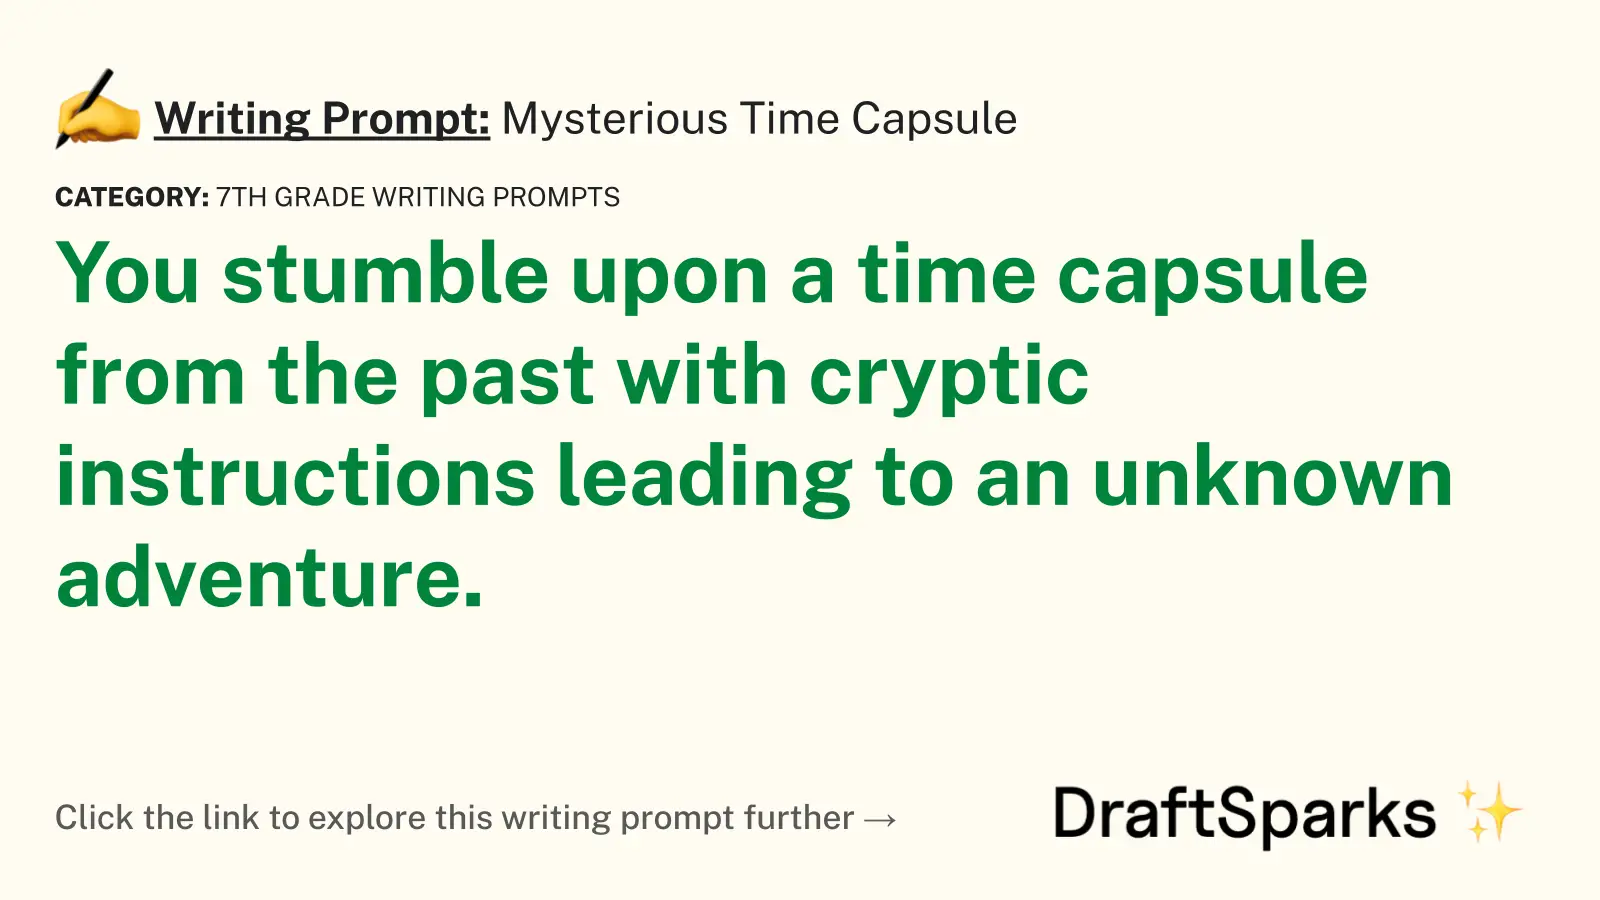 Mysterious Time Capsule